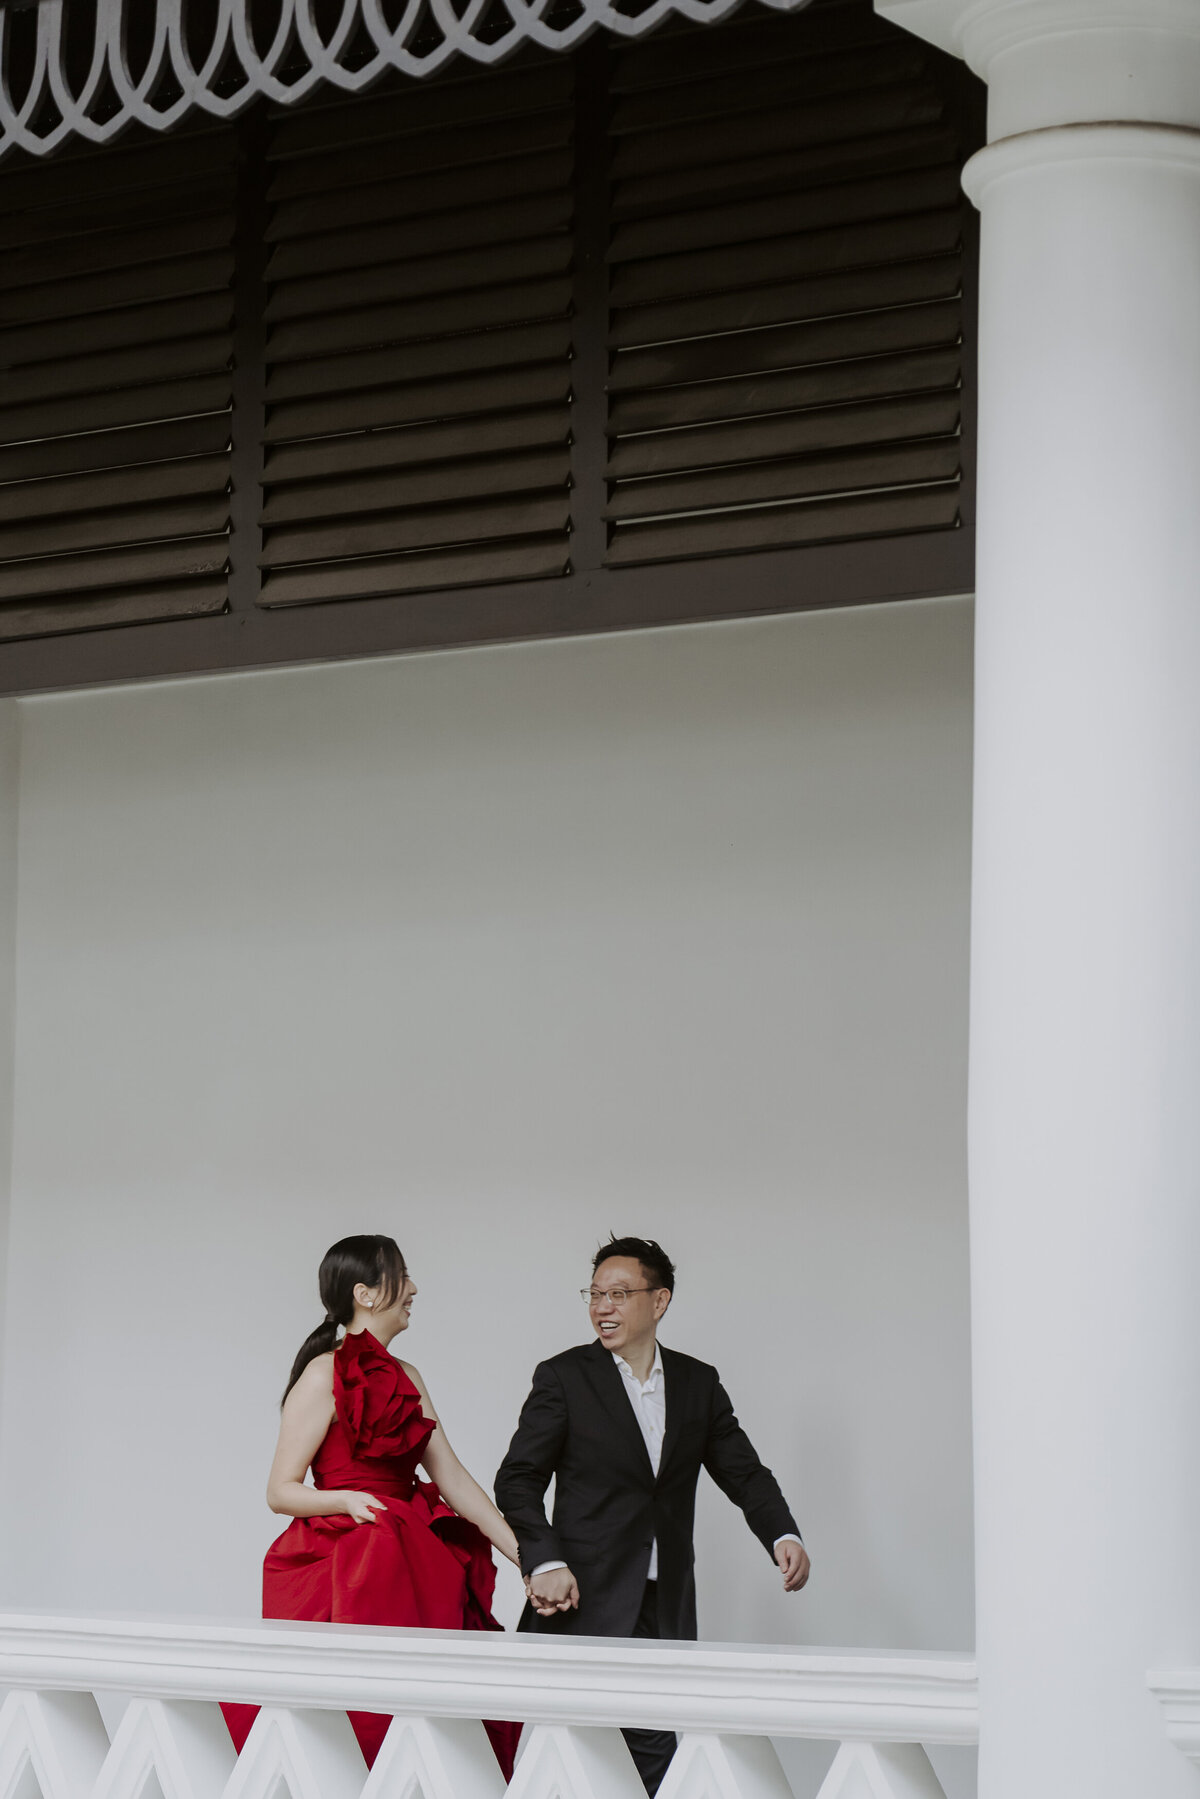 the bide and groom walking hand in hand on the balcony of the raffles hotel